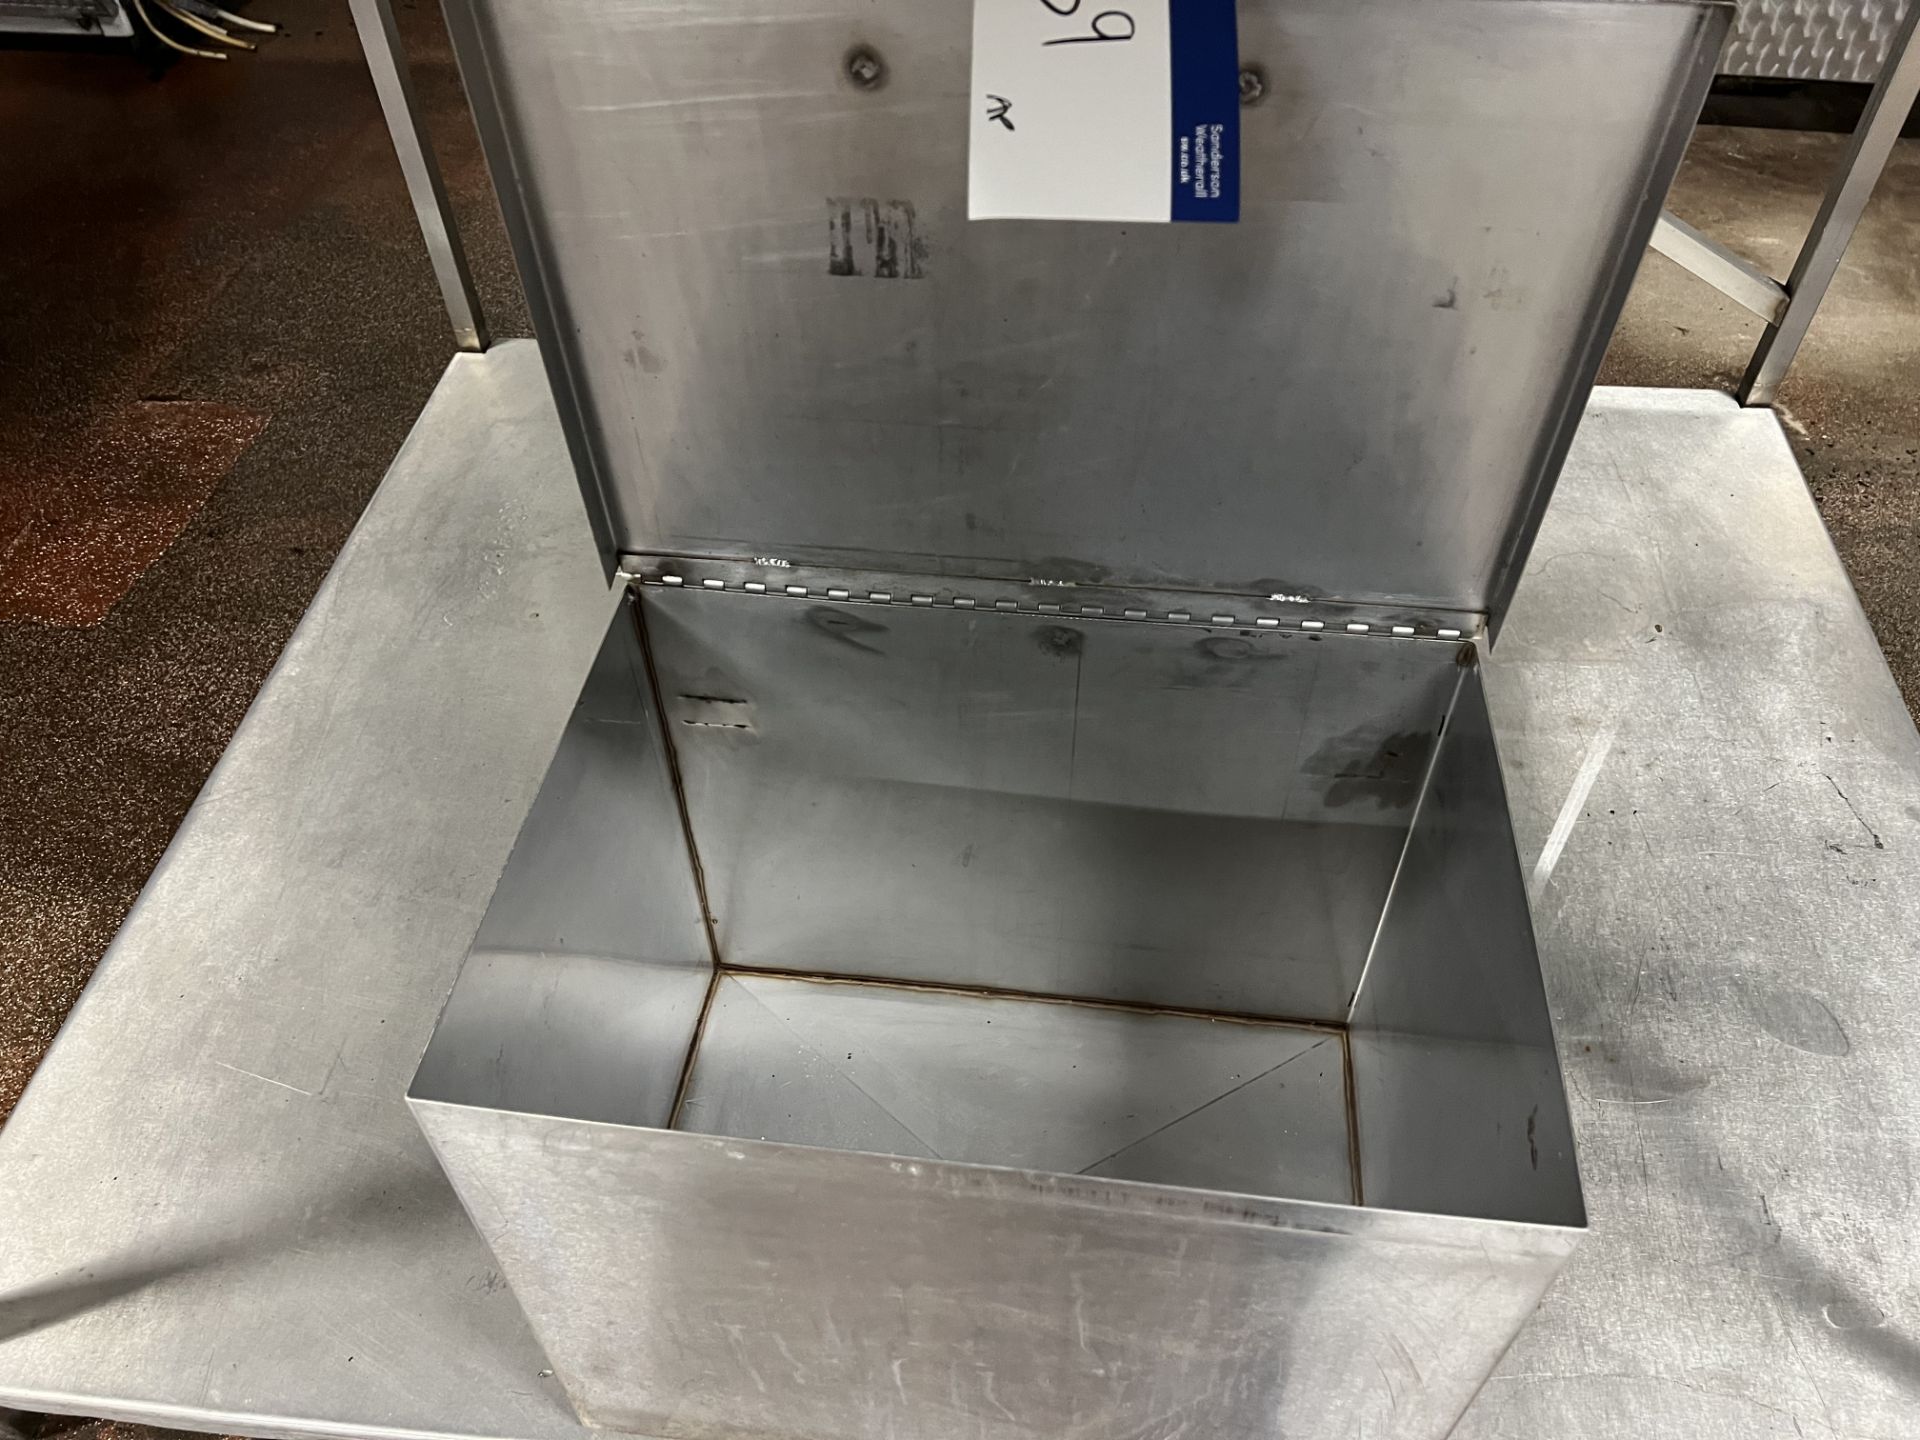 Stainless Steel Box, with lid, approx. 500mm x 350mm x 400mm high, lift out charge - £10 + VAT, - Bild 2 aus 2